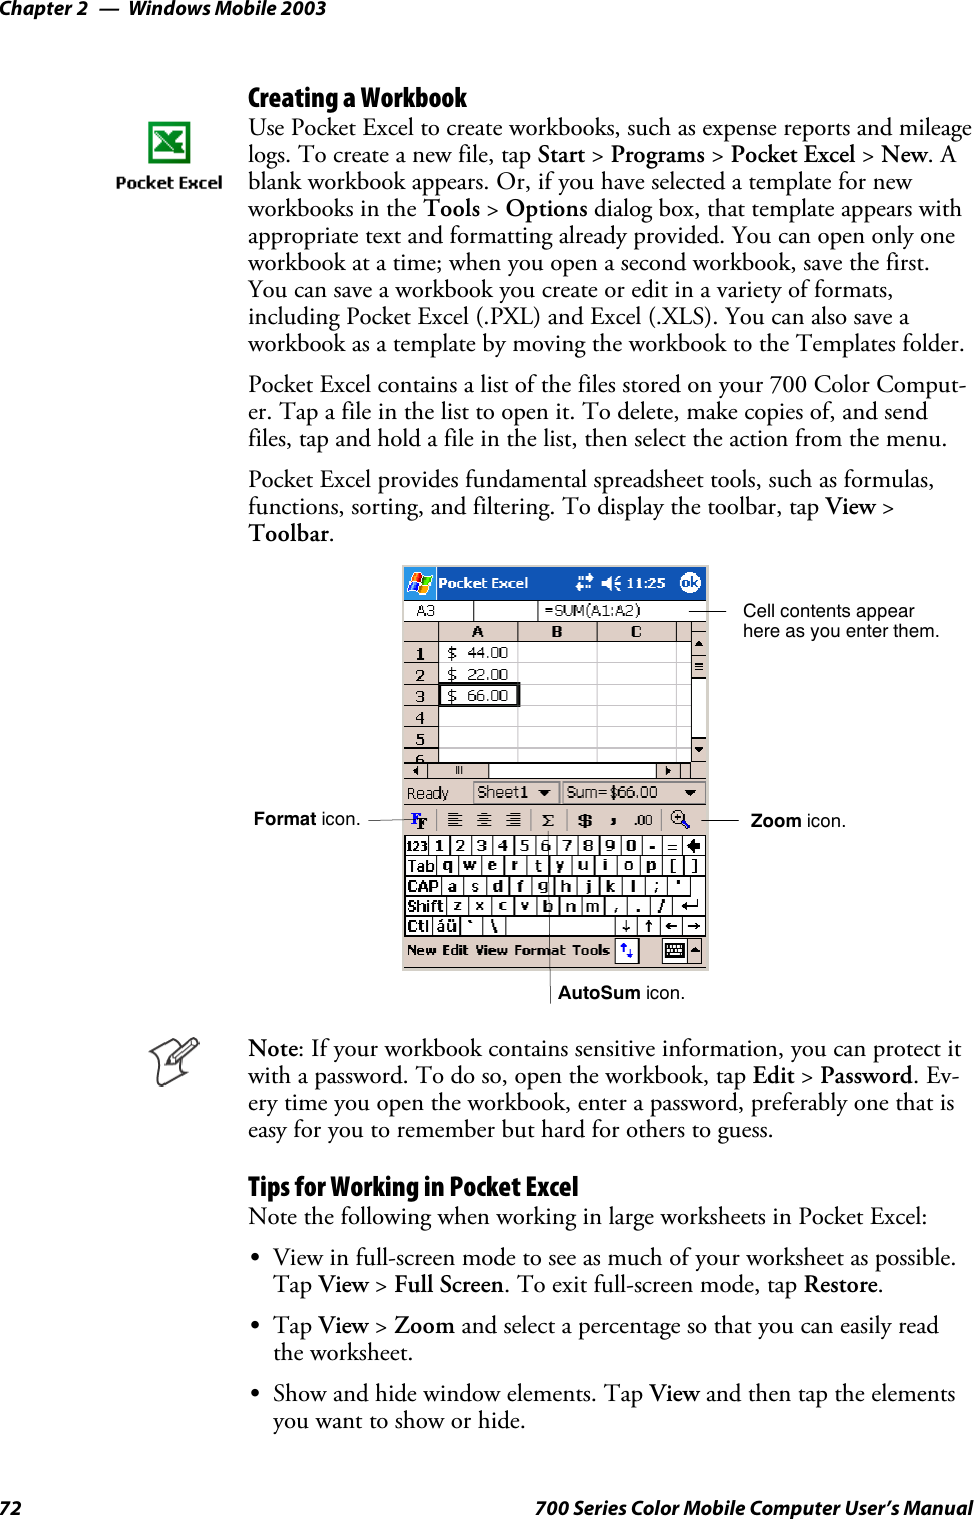 Windows Mobile 2003Chapter —272 700 Series Color Mobile Computer User’s ManualCreating a WorkbookUse Pocket Excel to create workbooks, such as expense reports and mileagelogs. To create a new file, tap Start &gt;Programs &gt;Pocket Excel &gt;New.Ablank workbook appears. Or, if you have selected a template for newworkbooks in the Tools &gt;Options dialog box, that template appears withappropriate text and formatting already provided. You can open only oneworkbook at a time; when you open a second workbook, save the first.You can save a workbook you create or edit in a variety of formats,including Pocket Excel (.PXL) and Excel (.XLS). You can also save aworkbook as a template by moving the workbook to the Templates folder.Pocket Excel contains a list of the files stored on your 700 Color Comput-er. Tap a file in the list to open it. To delete, make copies of, and sendfiles, tap and hold a file in the list, then select the action from the menu.Pocket Excel provides fundamental spreadsheet tools, such as formulas,functions, sorting, and filtering. To display the toolbar, tap View &gt;Toolbar.Zoom icon.Format icon.AutoSum icon.Cell contents appearhere as you enter them.Note: If your workbook contains sensitive information, you can protect itwith a password. To do so, open the workbook, tap Edit &gt;Password.Ev-ery time you open the workbook, enter a password, preferably one that iseasy for you to remember but hard for others to guess.Tips for Working in Pocket ExcelNote the following when working in large worksheets in Pocket Excel:SView in full-screen mode to see as much of your worksheet as possible.Tap View &gt;Full Screen. To exit full-screen mode, tap Restore.STap View &gt;Zoom and select a percentage so that you can easily readthe worksheet.SShow and hide window elements. Tap View and then tap the elementsyouwanttoshoworhide.